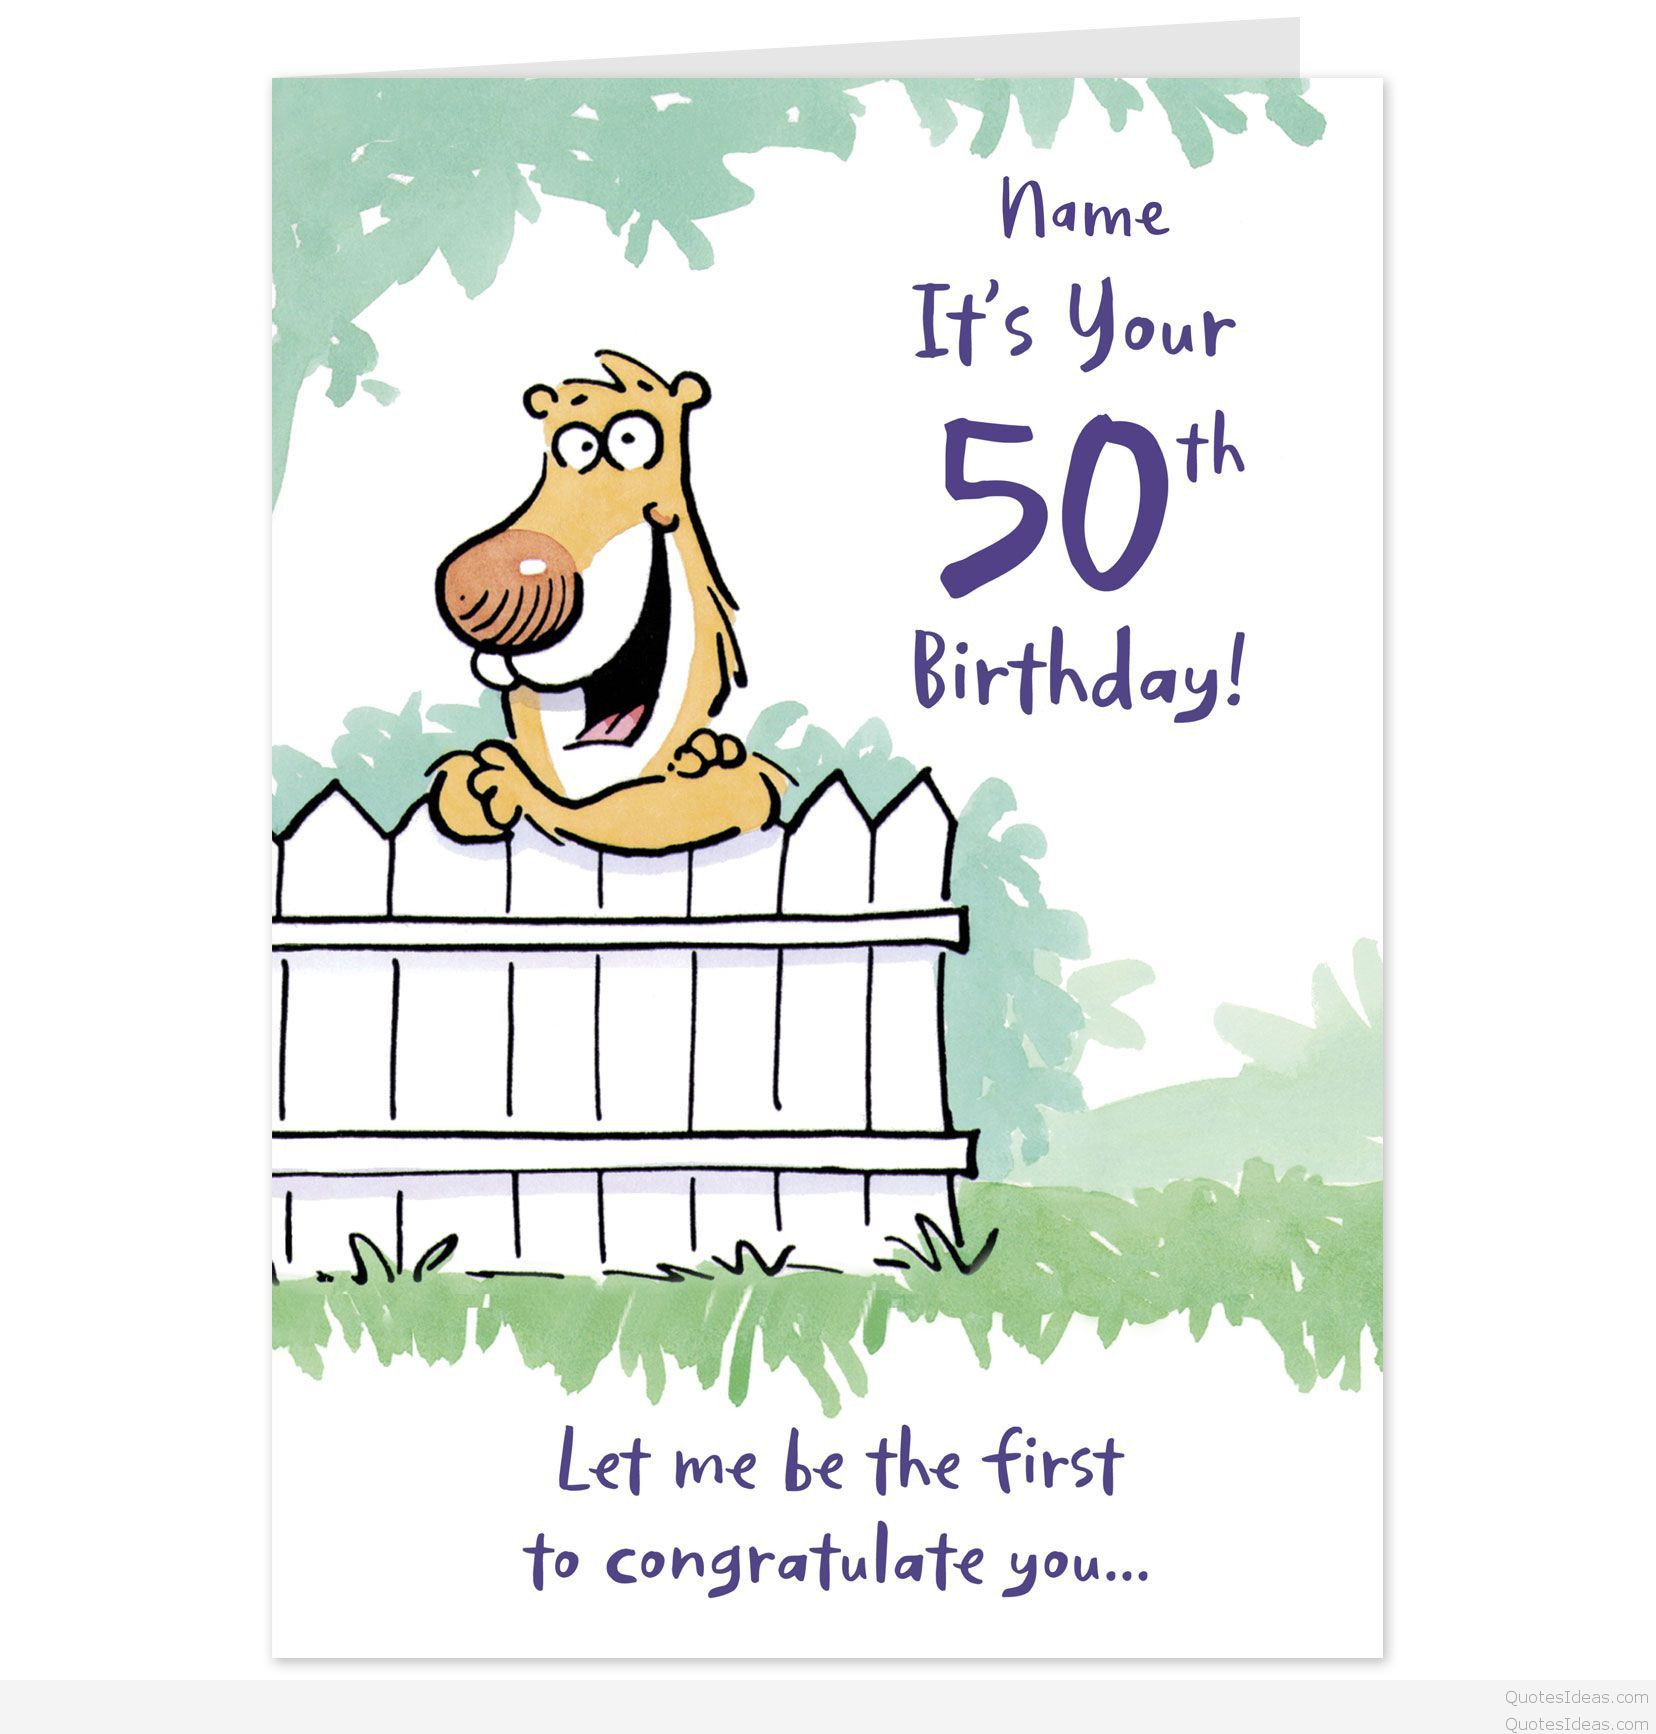 Happy Birthday Cards For Him Funny
 Latest funny cards quotes and sayings